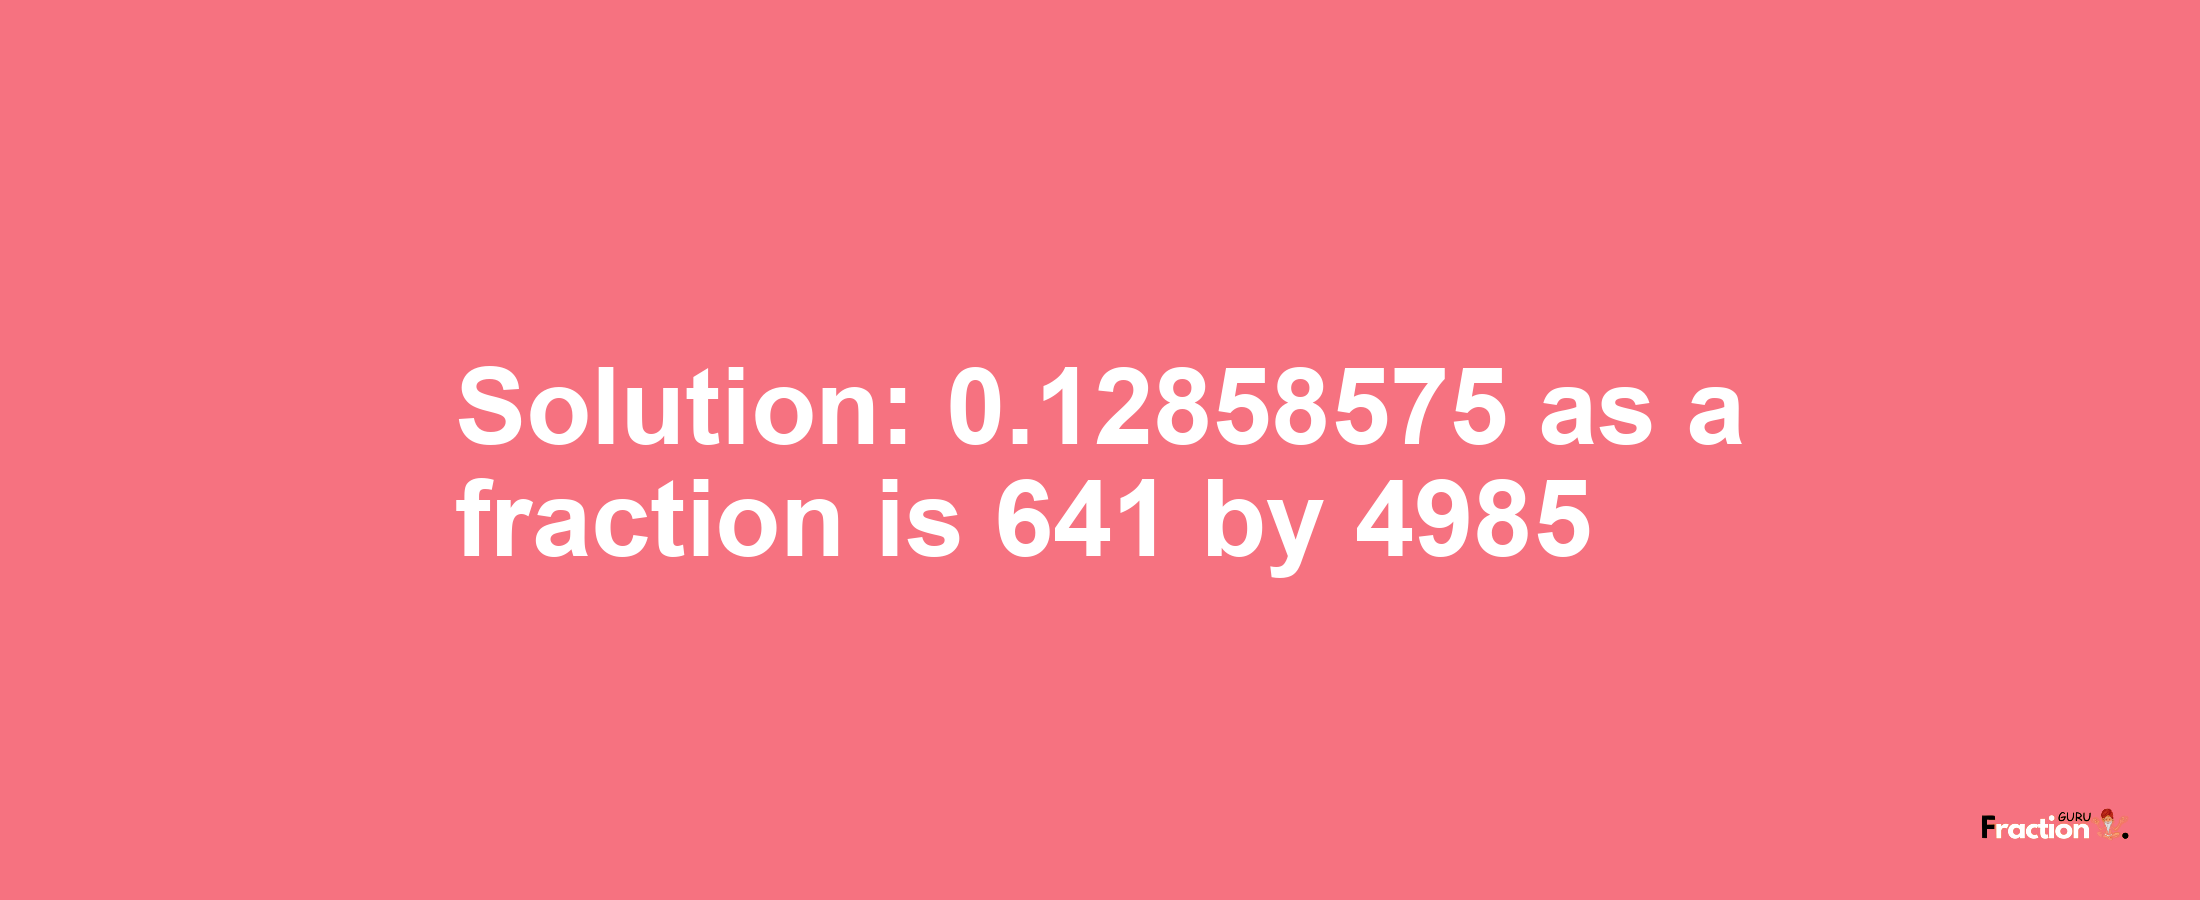 Solution:0.12858575 as a fraction is 641/4985